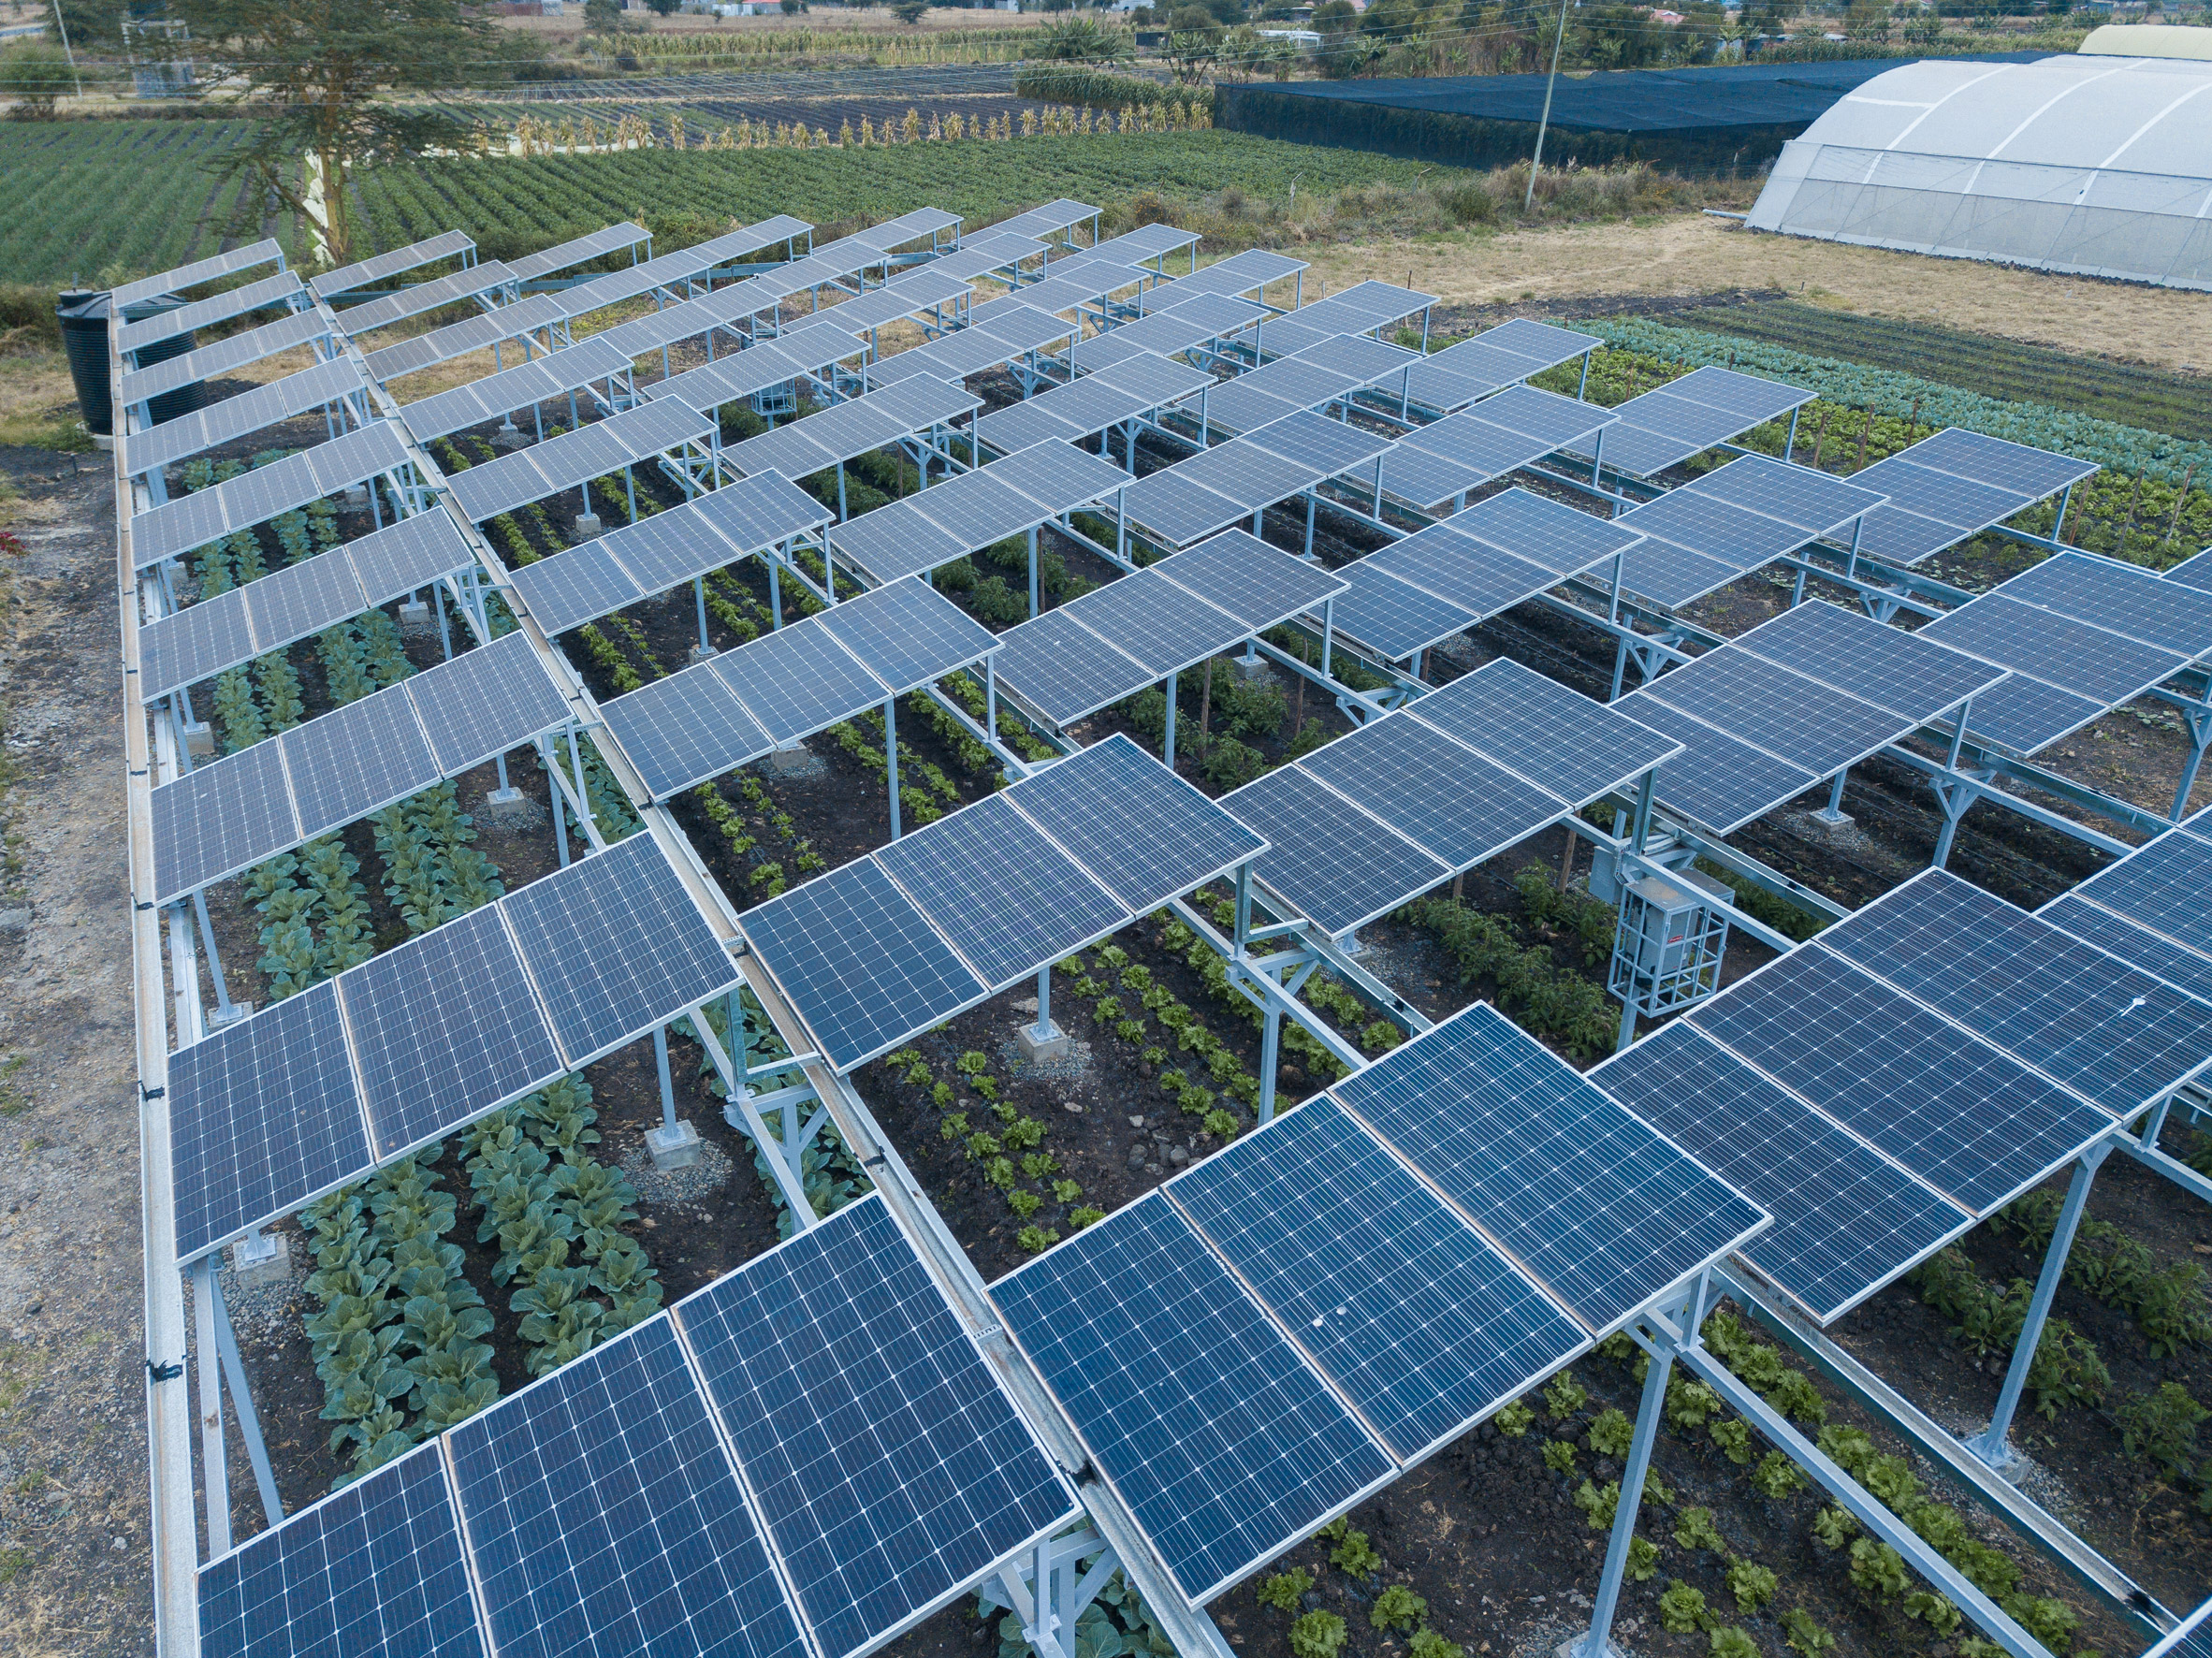 Agrivoltaic solar farm from Harvesting the Sun Twice project in Kenya, photographed by Chloride Exide